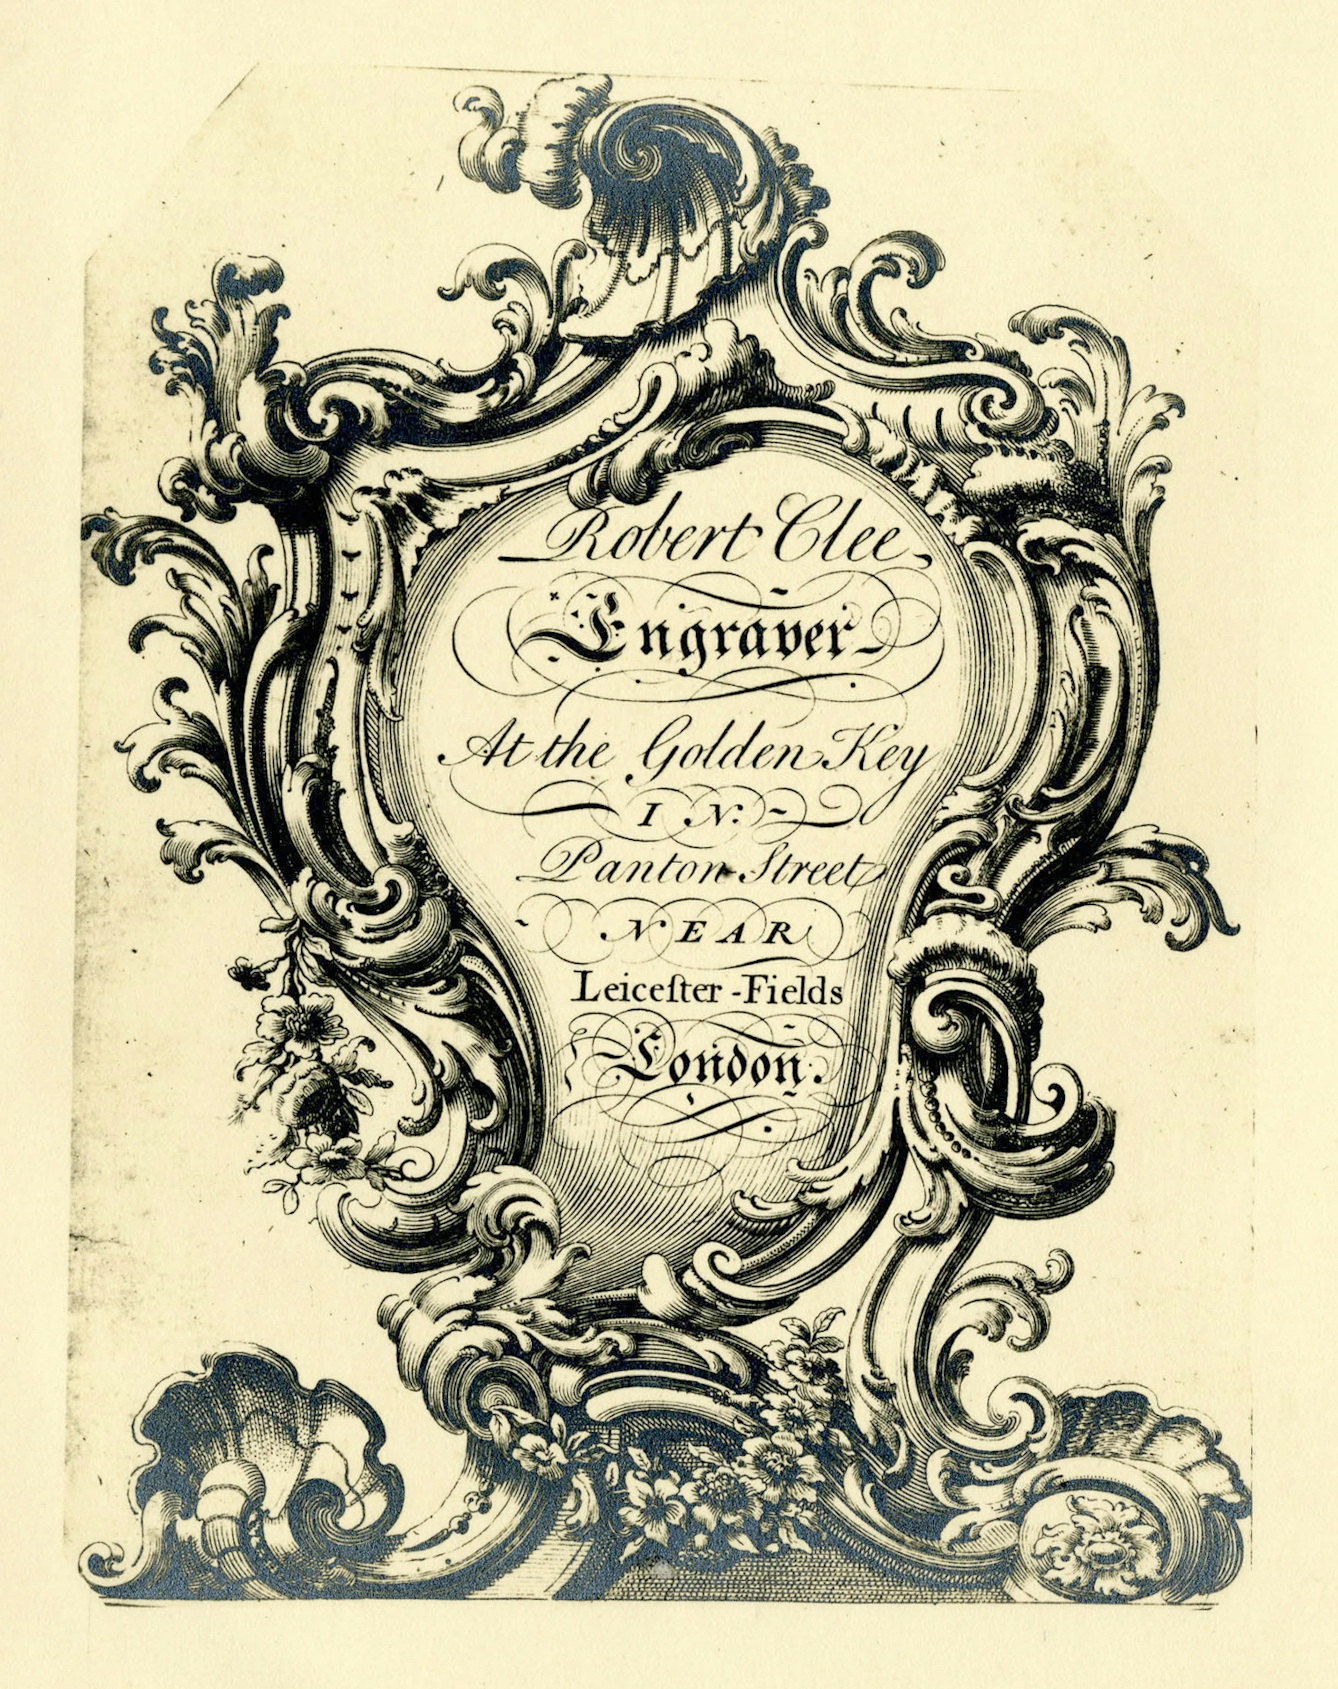 18th century trade card for Robert Clee, engraver